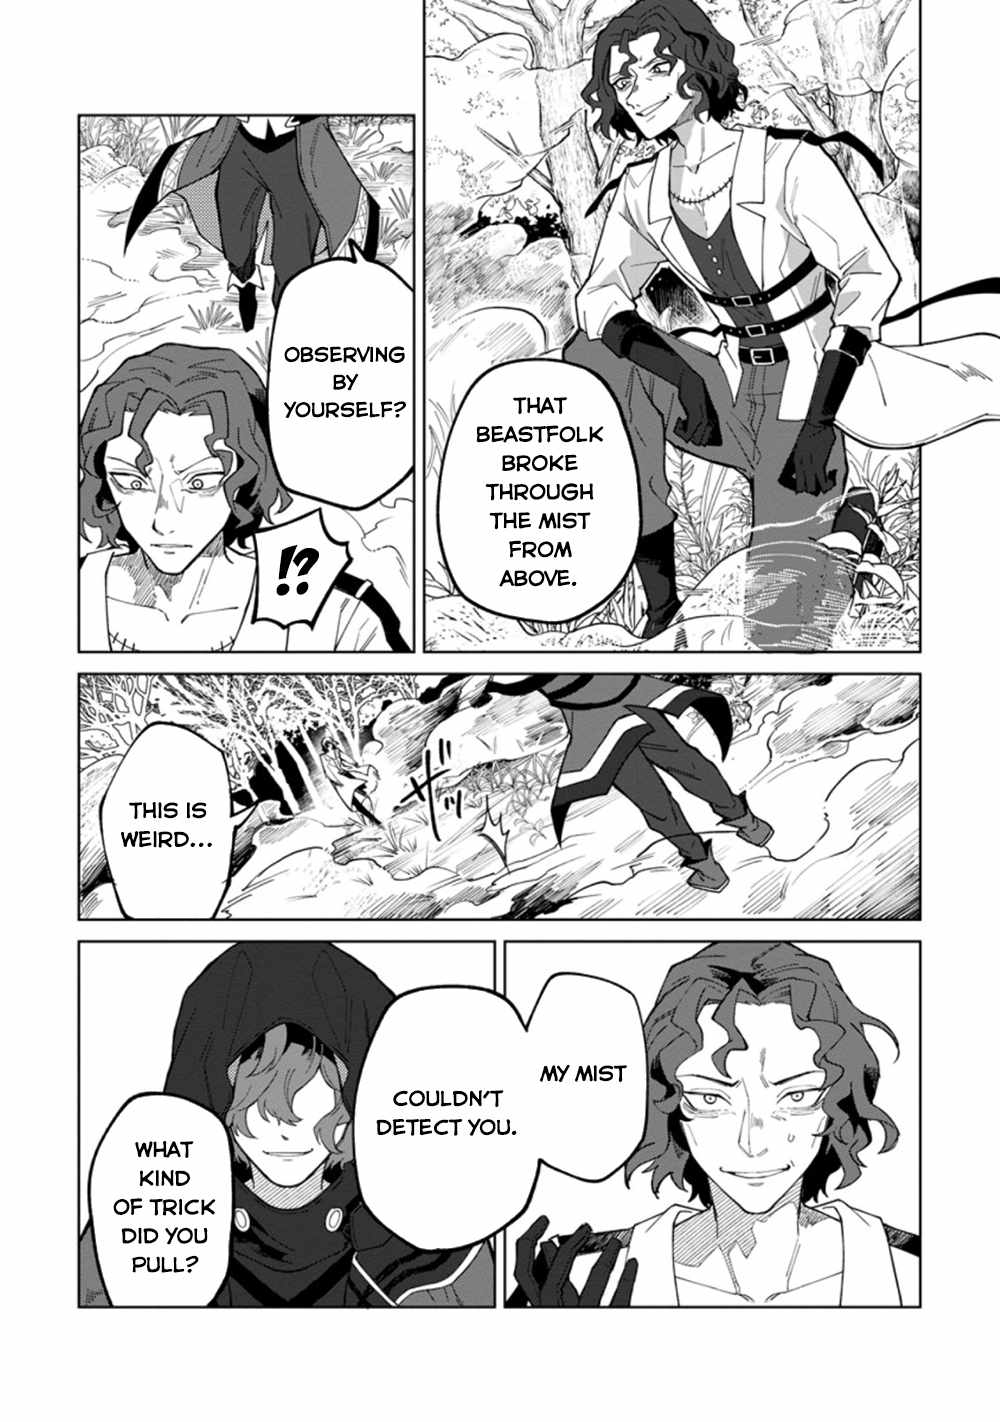 The White Mage Who Was Banished From the Hero's Party Is Picked up by an S Rank Adventurer ~ This White Mage Is Too Out of the Ordinary! Chapter 16-2-eng-li - Page 8